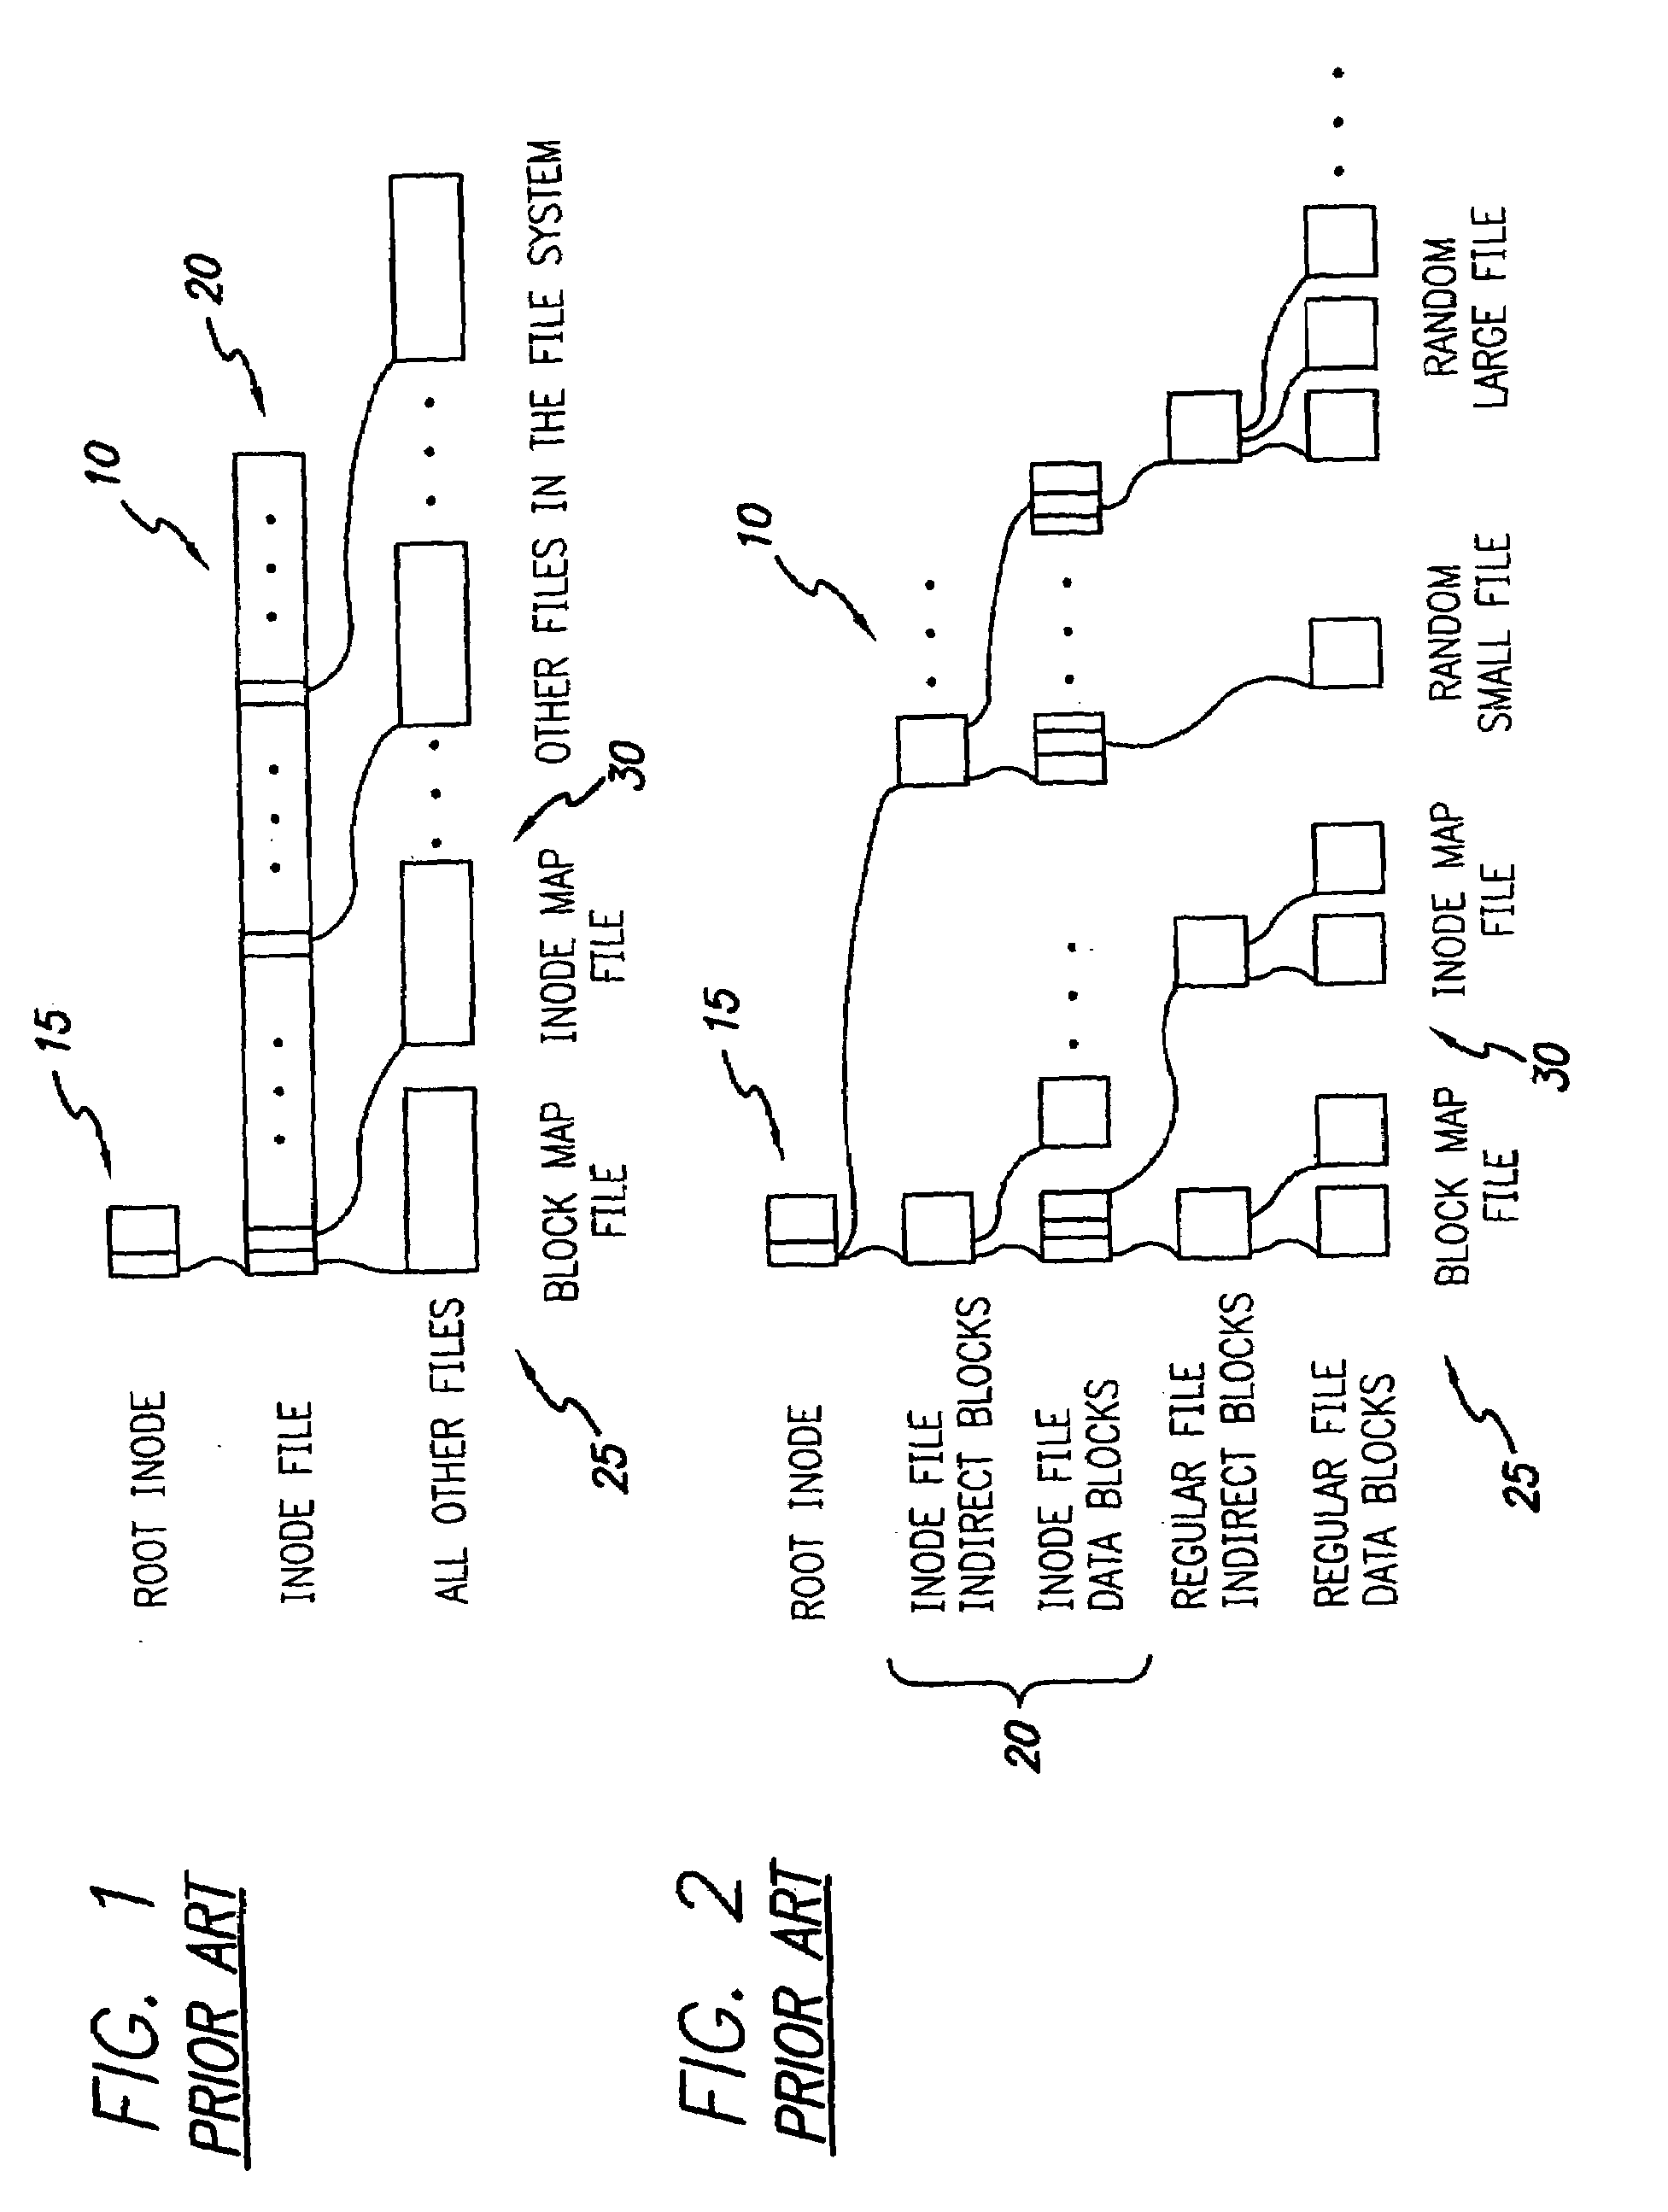 System and method for using file system snapshots for online data backup